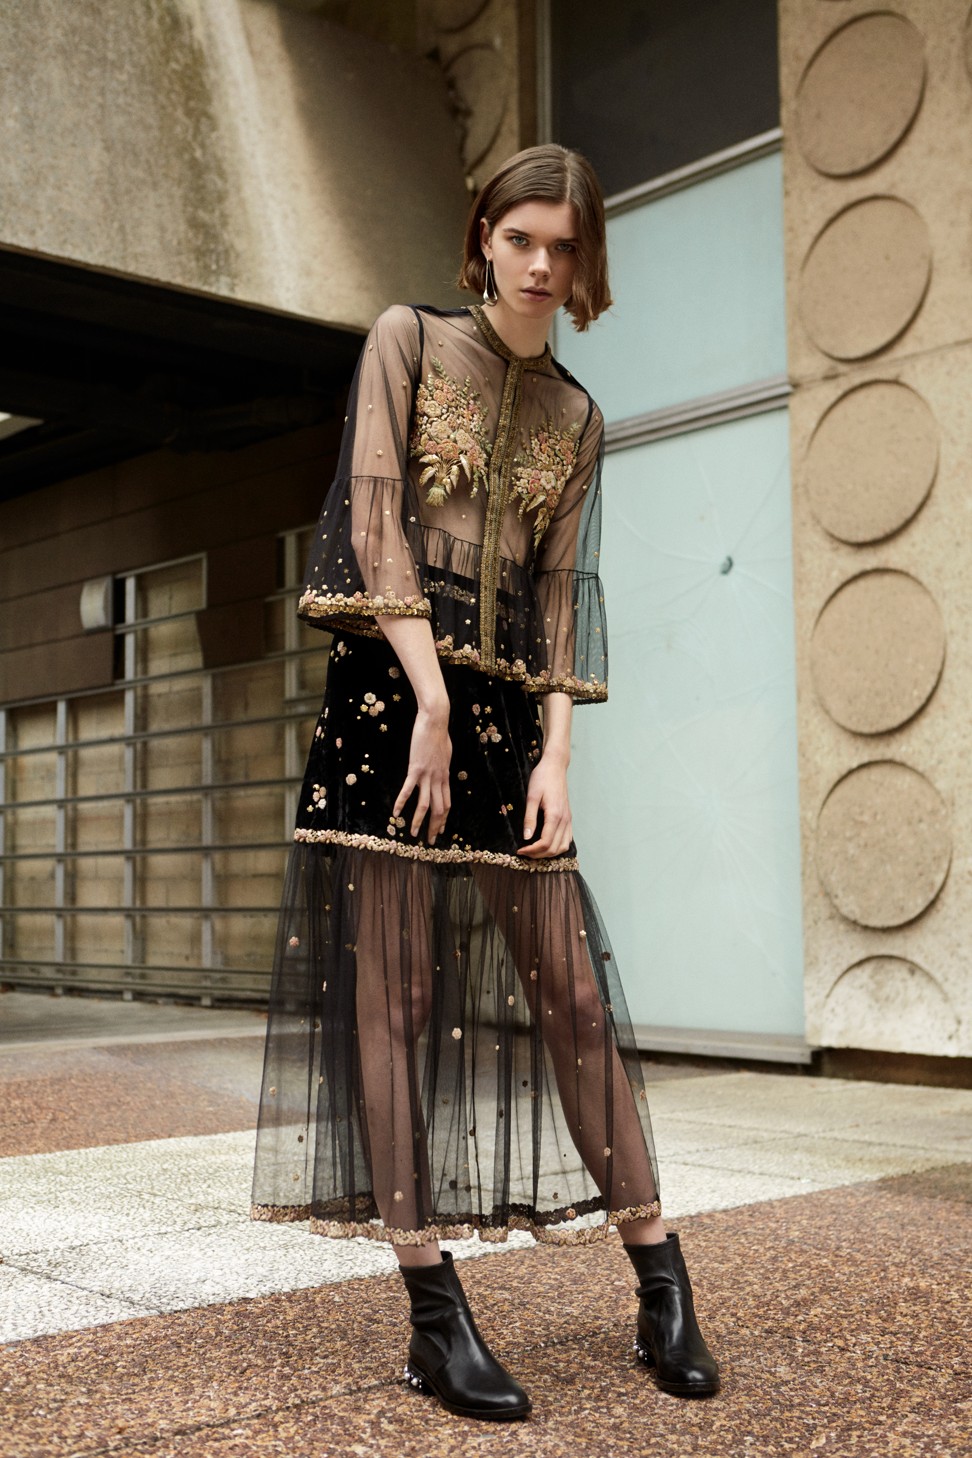 A look from Sabyasachi’s global capsule collection with Lane Crawford.